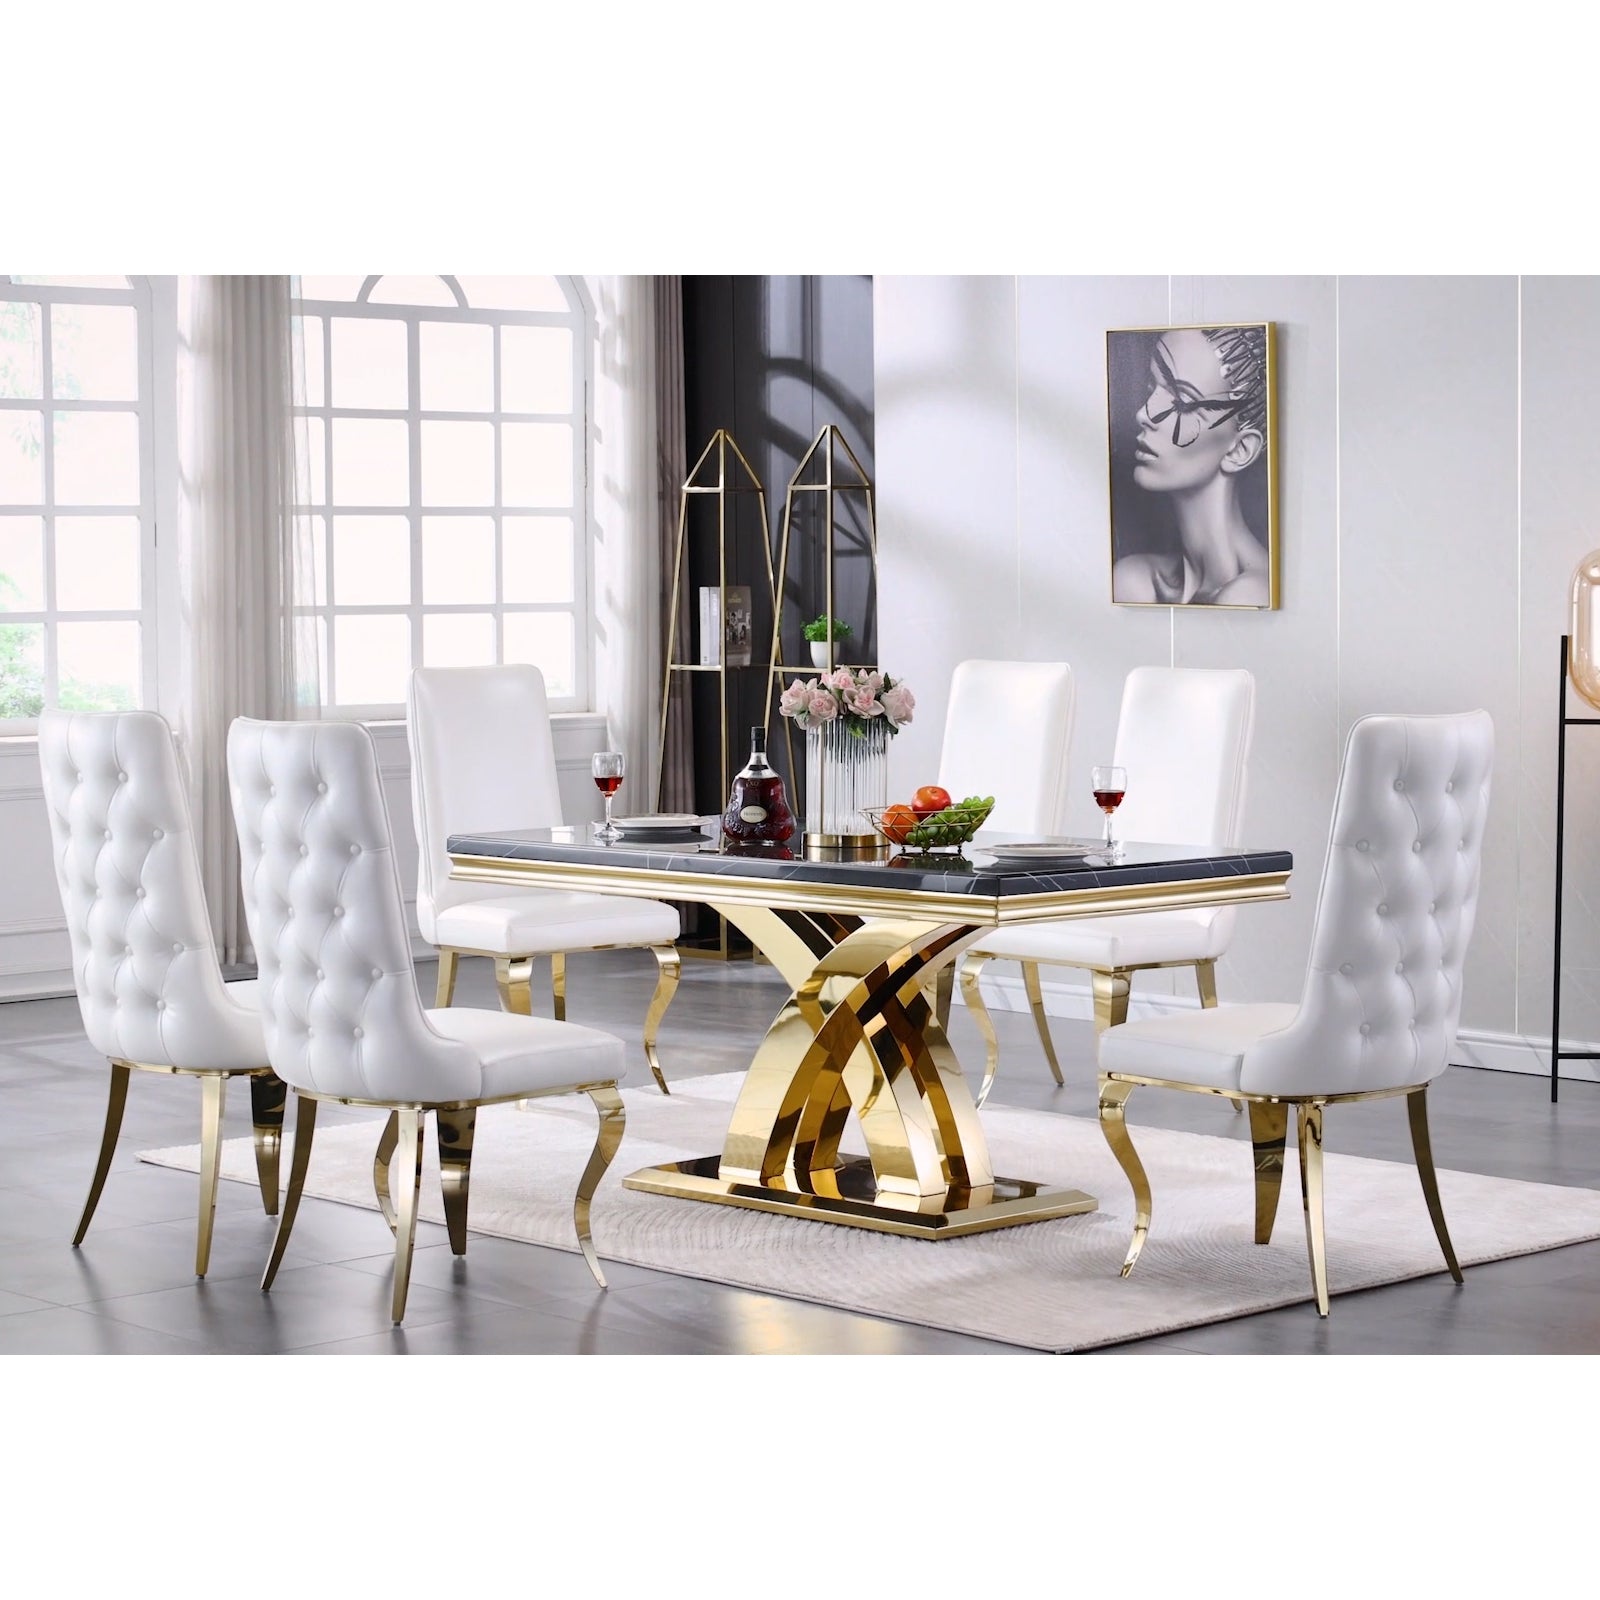 Wholesale White Leather dining chairs